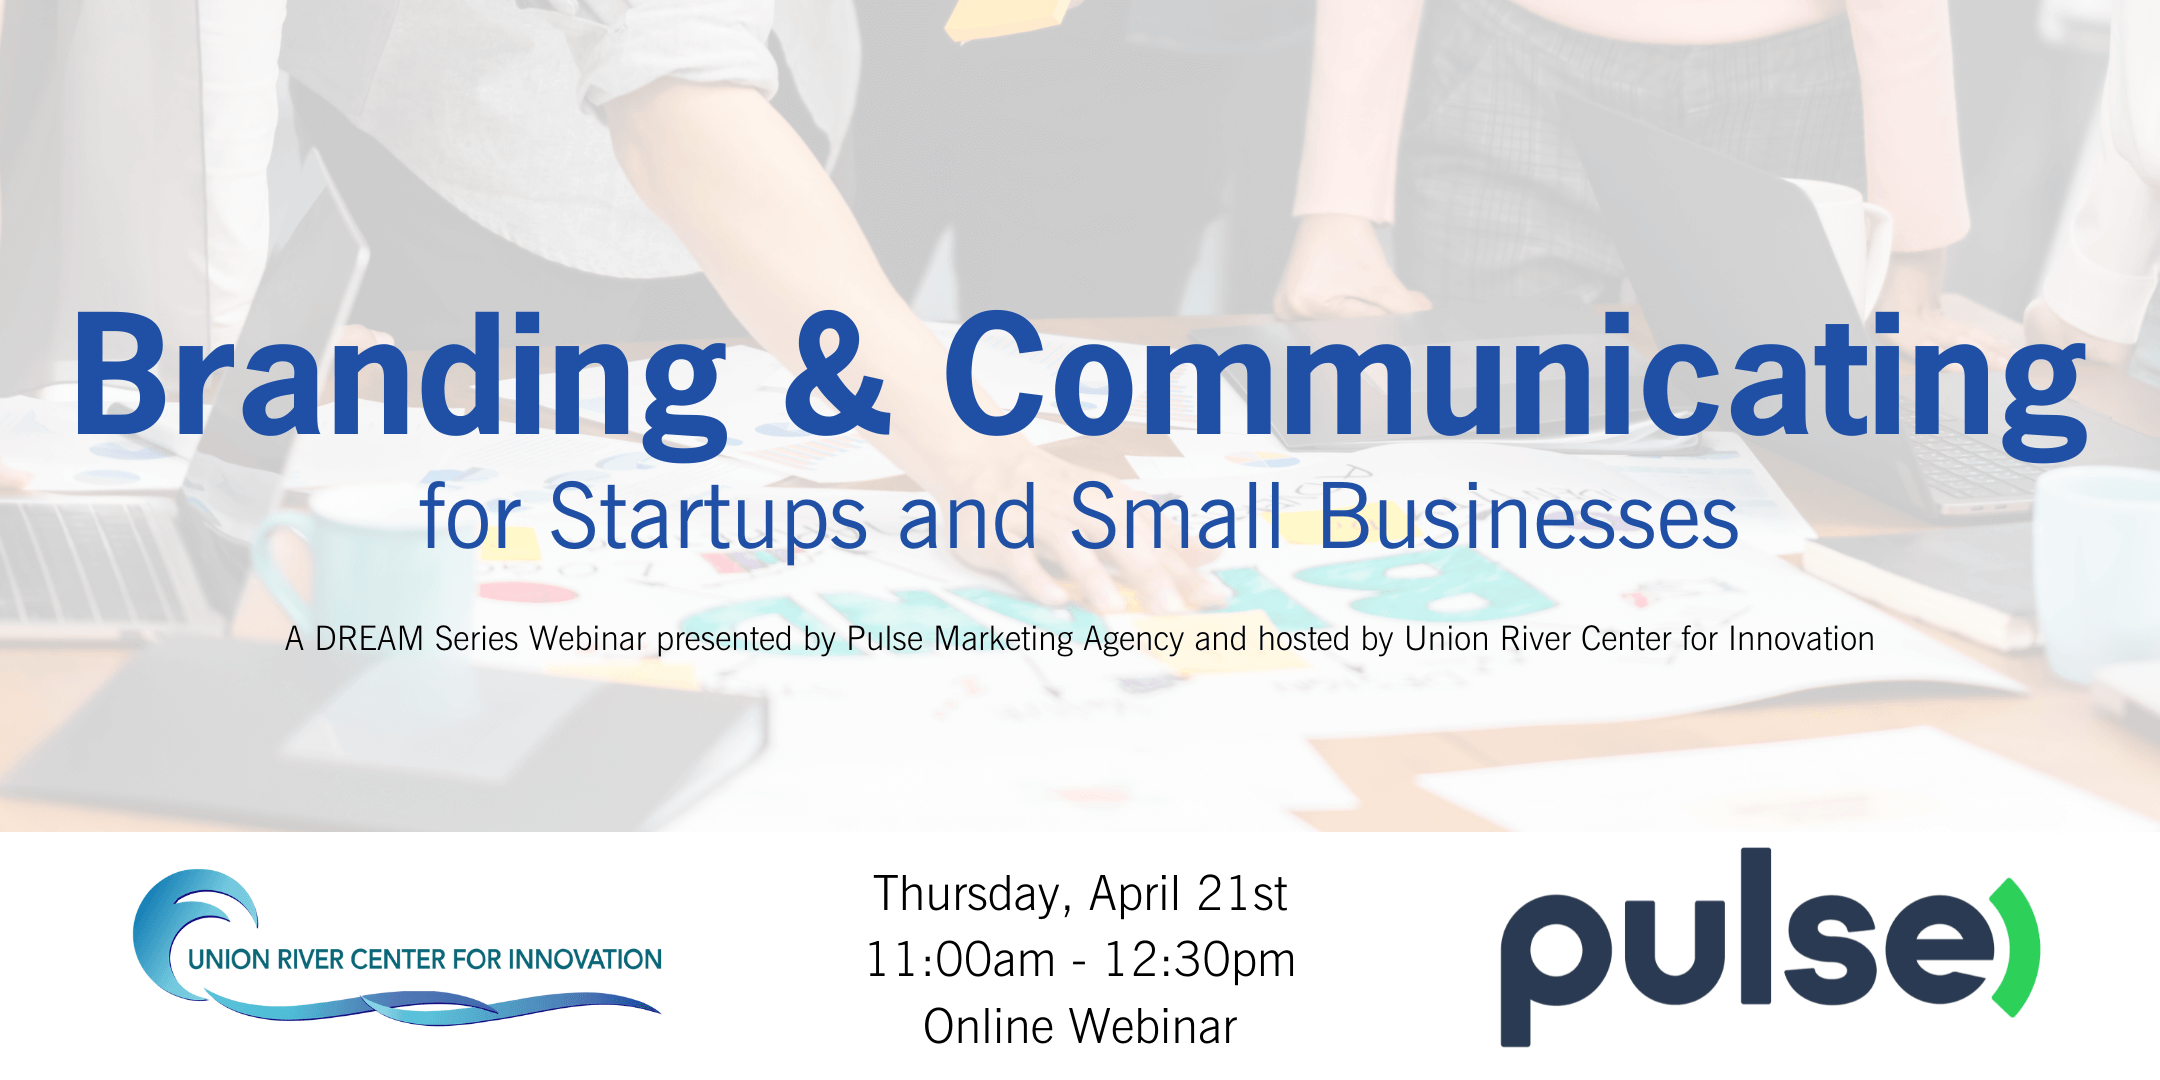 Branding & Communicating for Startups and Small Businesses | Union River Center for Innovation